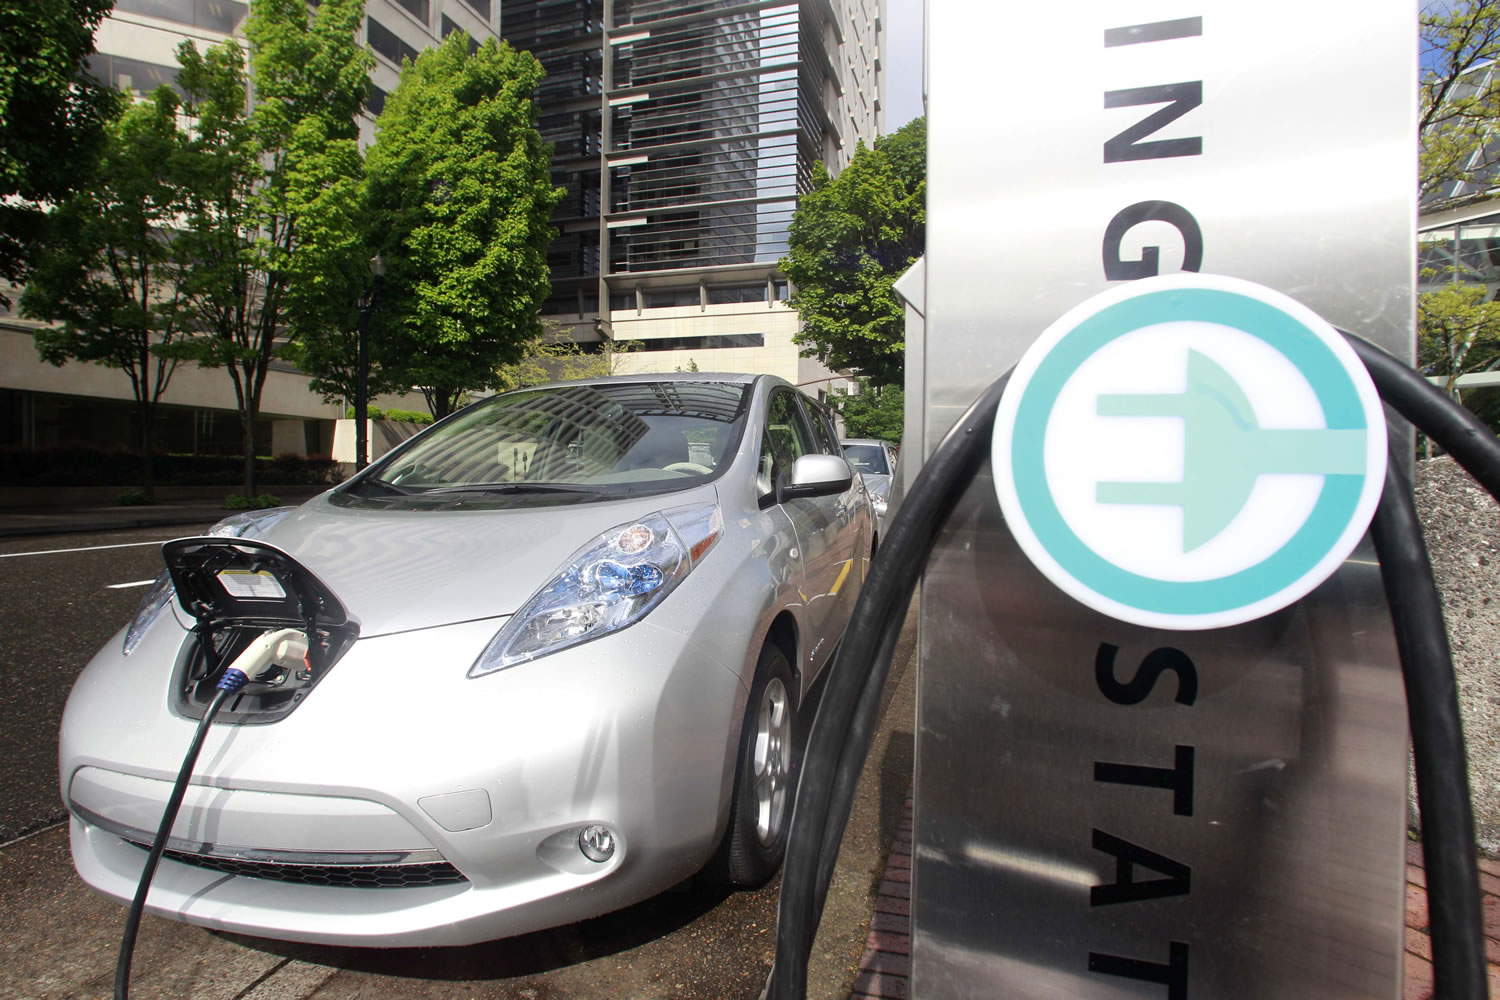 Washington state transportation officials plan to install six electric vehicle charging stations along the I-5 corridor.